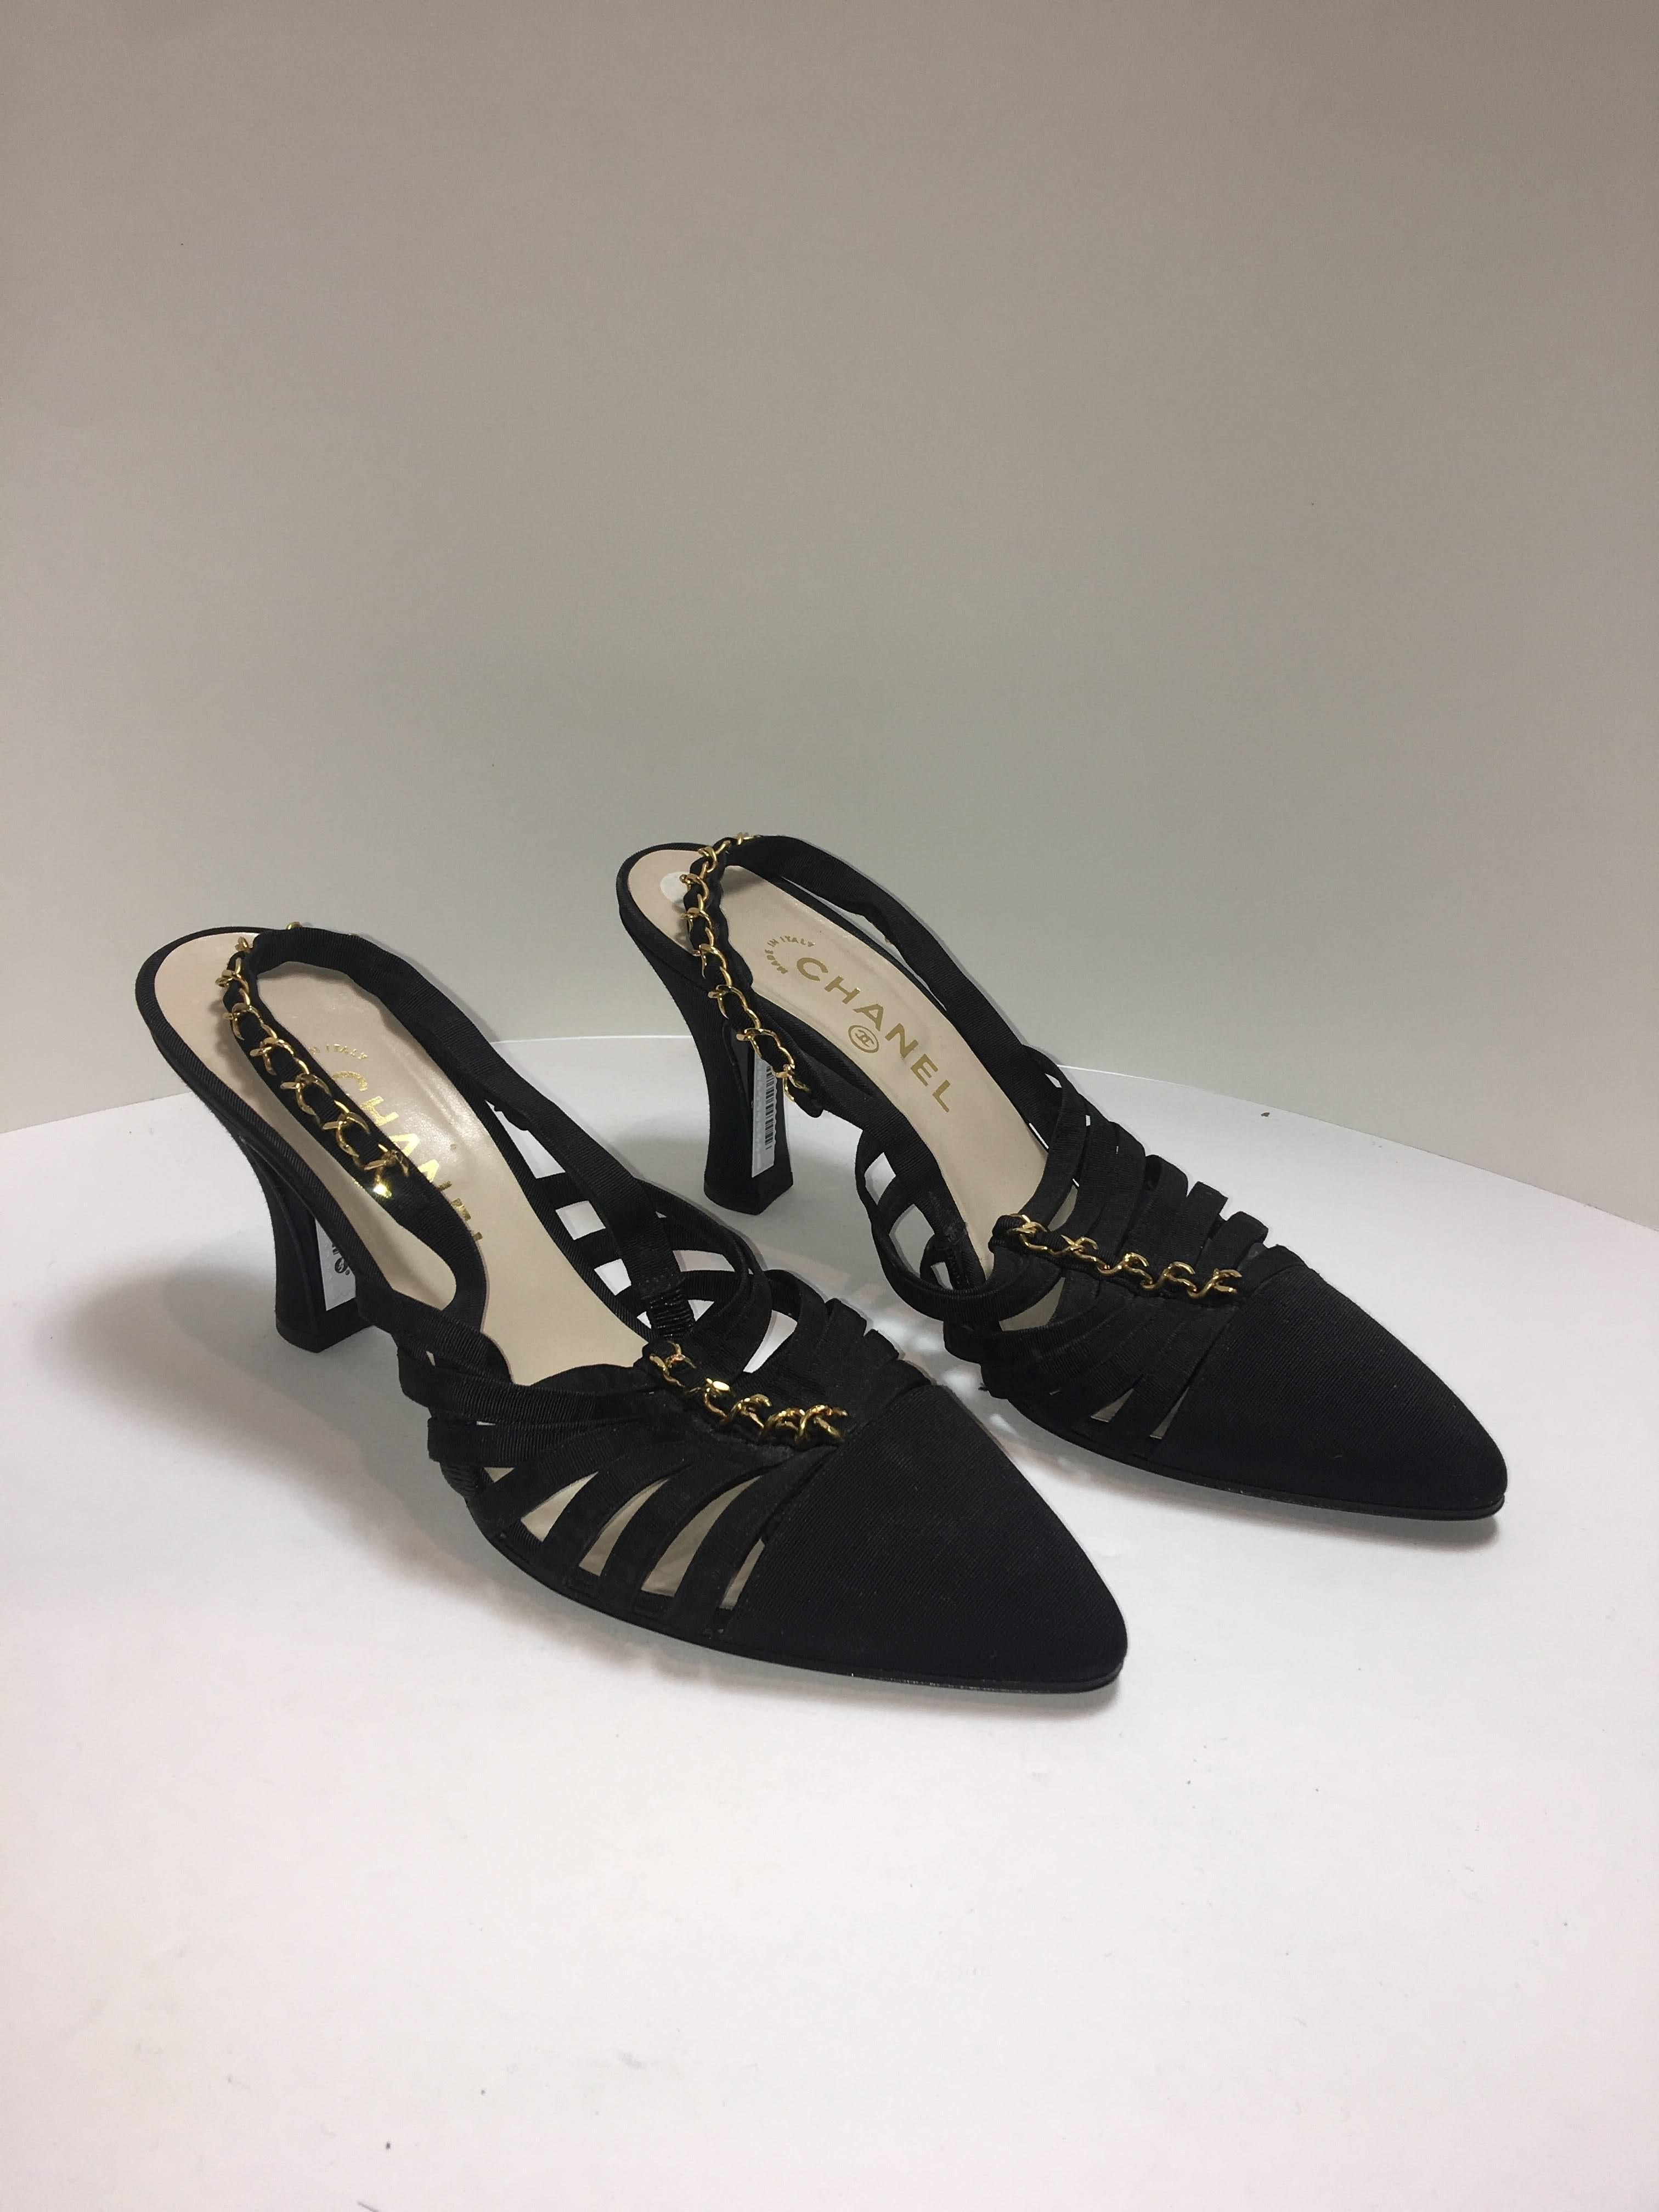 Chanel size 39.5 in Black Ribbon with Gold Chain detail. Pointed Toe Sling backs with Kitten Heel. 